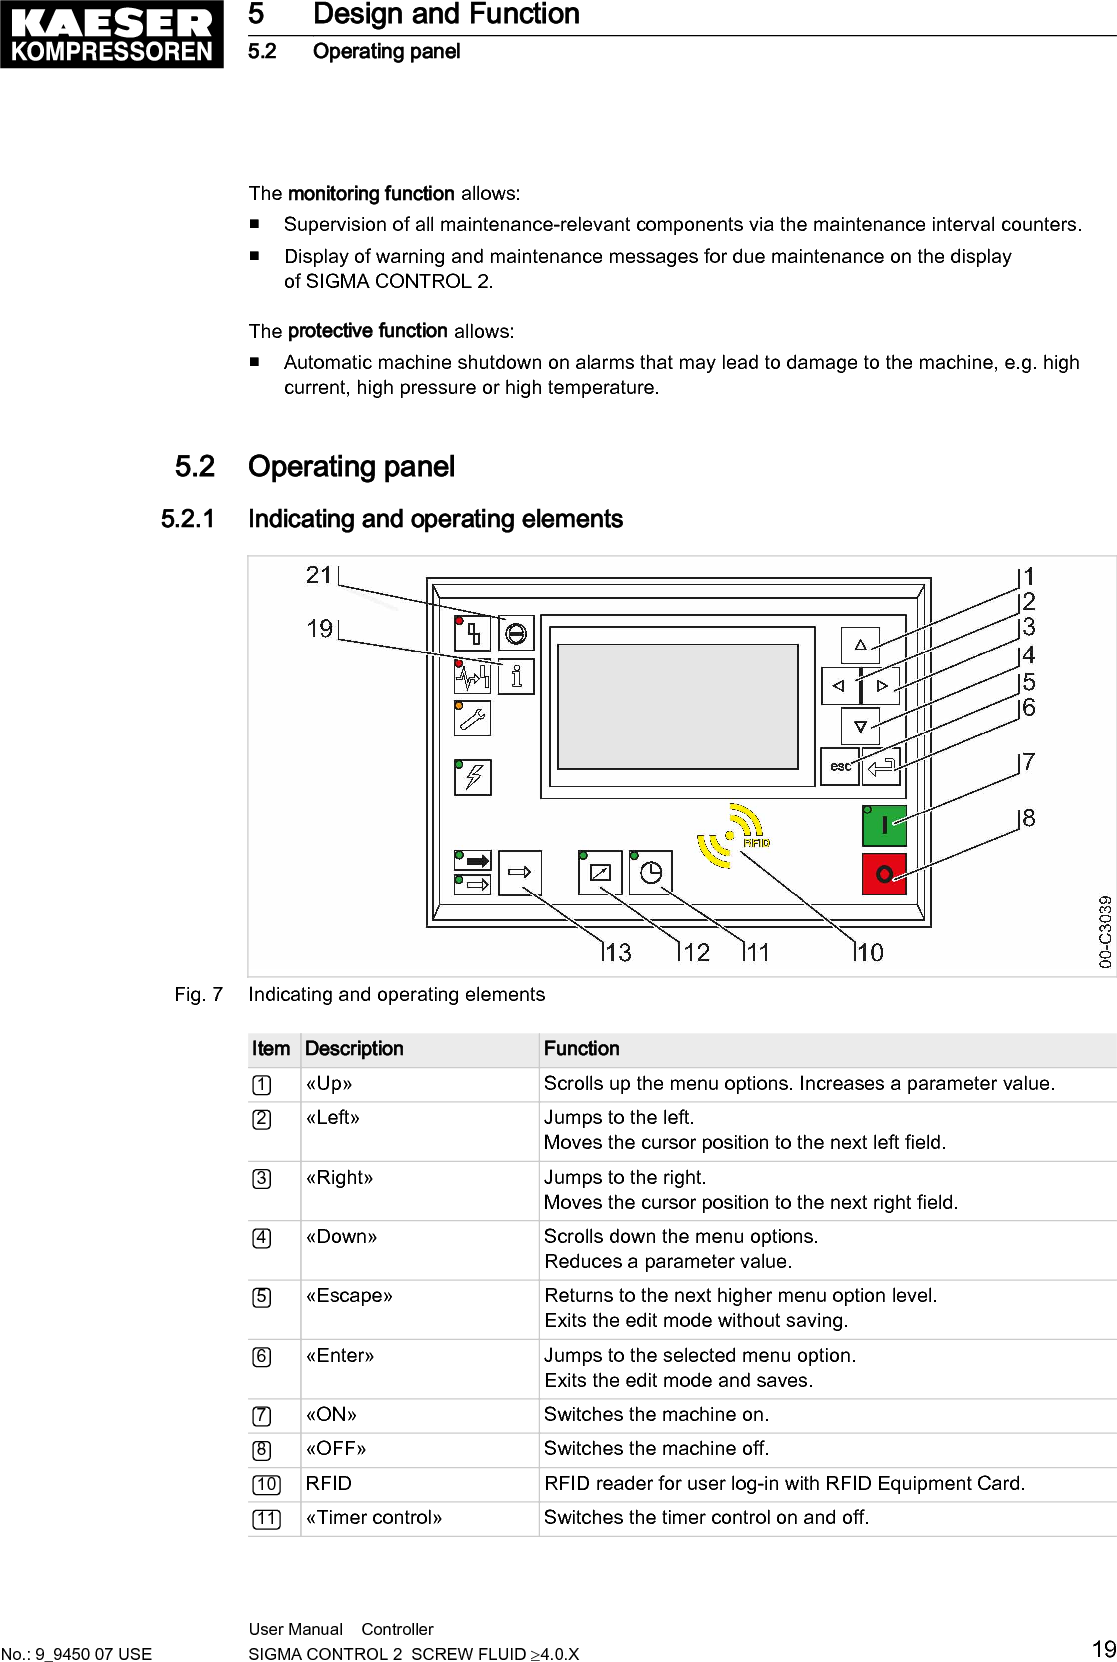 The monitoring function allows:■ Supervision of all maintenance-relevant components via the maintenance interval counters.■ Display of warning and maintenance messages for due maintenance on the displayof SIGMA CONTROL 2.The protective function allows:■ Automatic machine shutdown on alarms that may lead to damage to the machine, e.g. highcurrent, high pressure or high temperature.5.2  Operating panel5.2.1  Indicating and operating elementsFig. 7 Indicating and operating elementsItem Description Function1«Up» Scrolls up the menu options. Increases a parameter value.2«Left» Jumps to the left.Moves the cursor position to the next left field.3«Right» Jumps to the right.Moves the cursor position to the next right field.4«Down» Scrolls down the menu options.Reduces a parameter value.5«Escape» Returns to the next higher menu option level.Exits the edit mode without saving.6«Enter» Jumps to the selected menu option.Exits the edit mode and saves.7«ON» Switches the machine on.8«OFF» Switches the machine off.10 RFID RFID reader for user log-in with RFID Equipment Card.11 «Timer control» Switches the timer control on and off.5 Design and Function5.2 Operating panelNo.: 9_9450 07 USEUser Manual    Controller  SIGMA CONTROL 2  SCREW FLUID ≥4.0.X 19